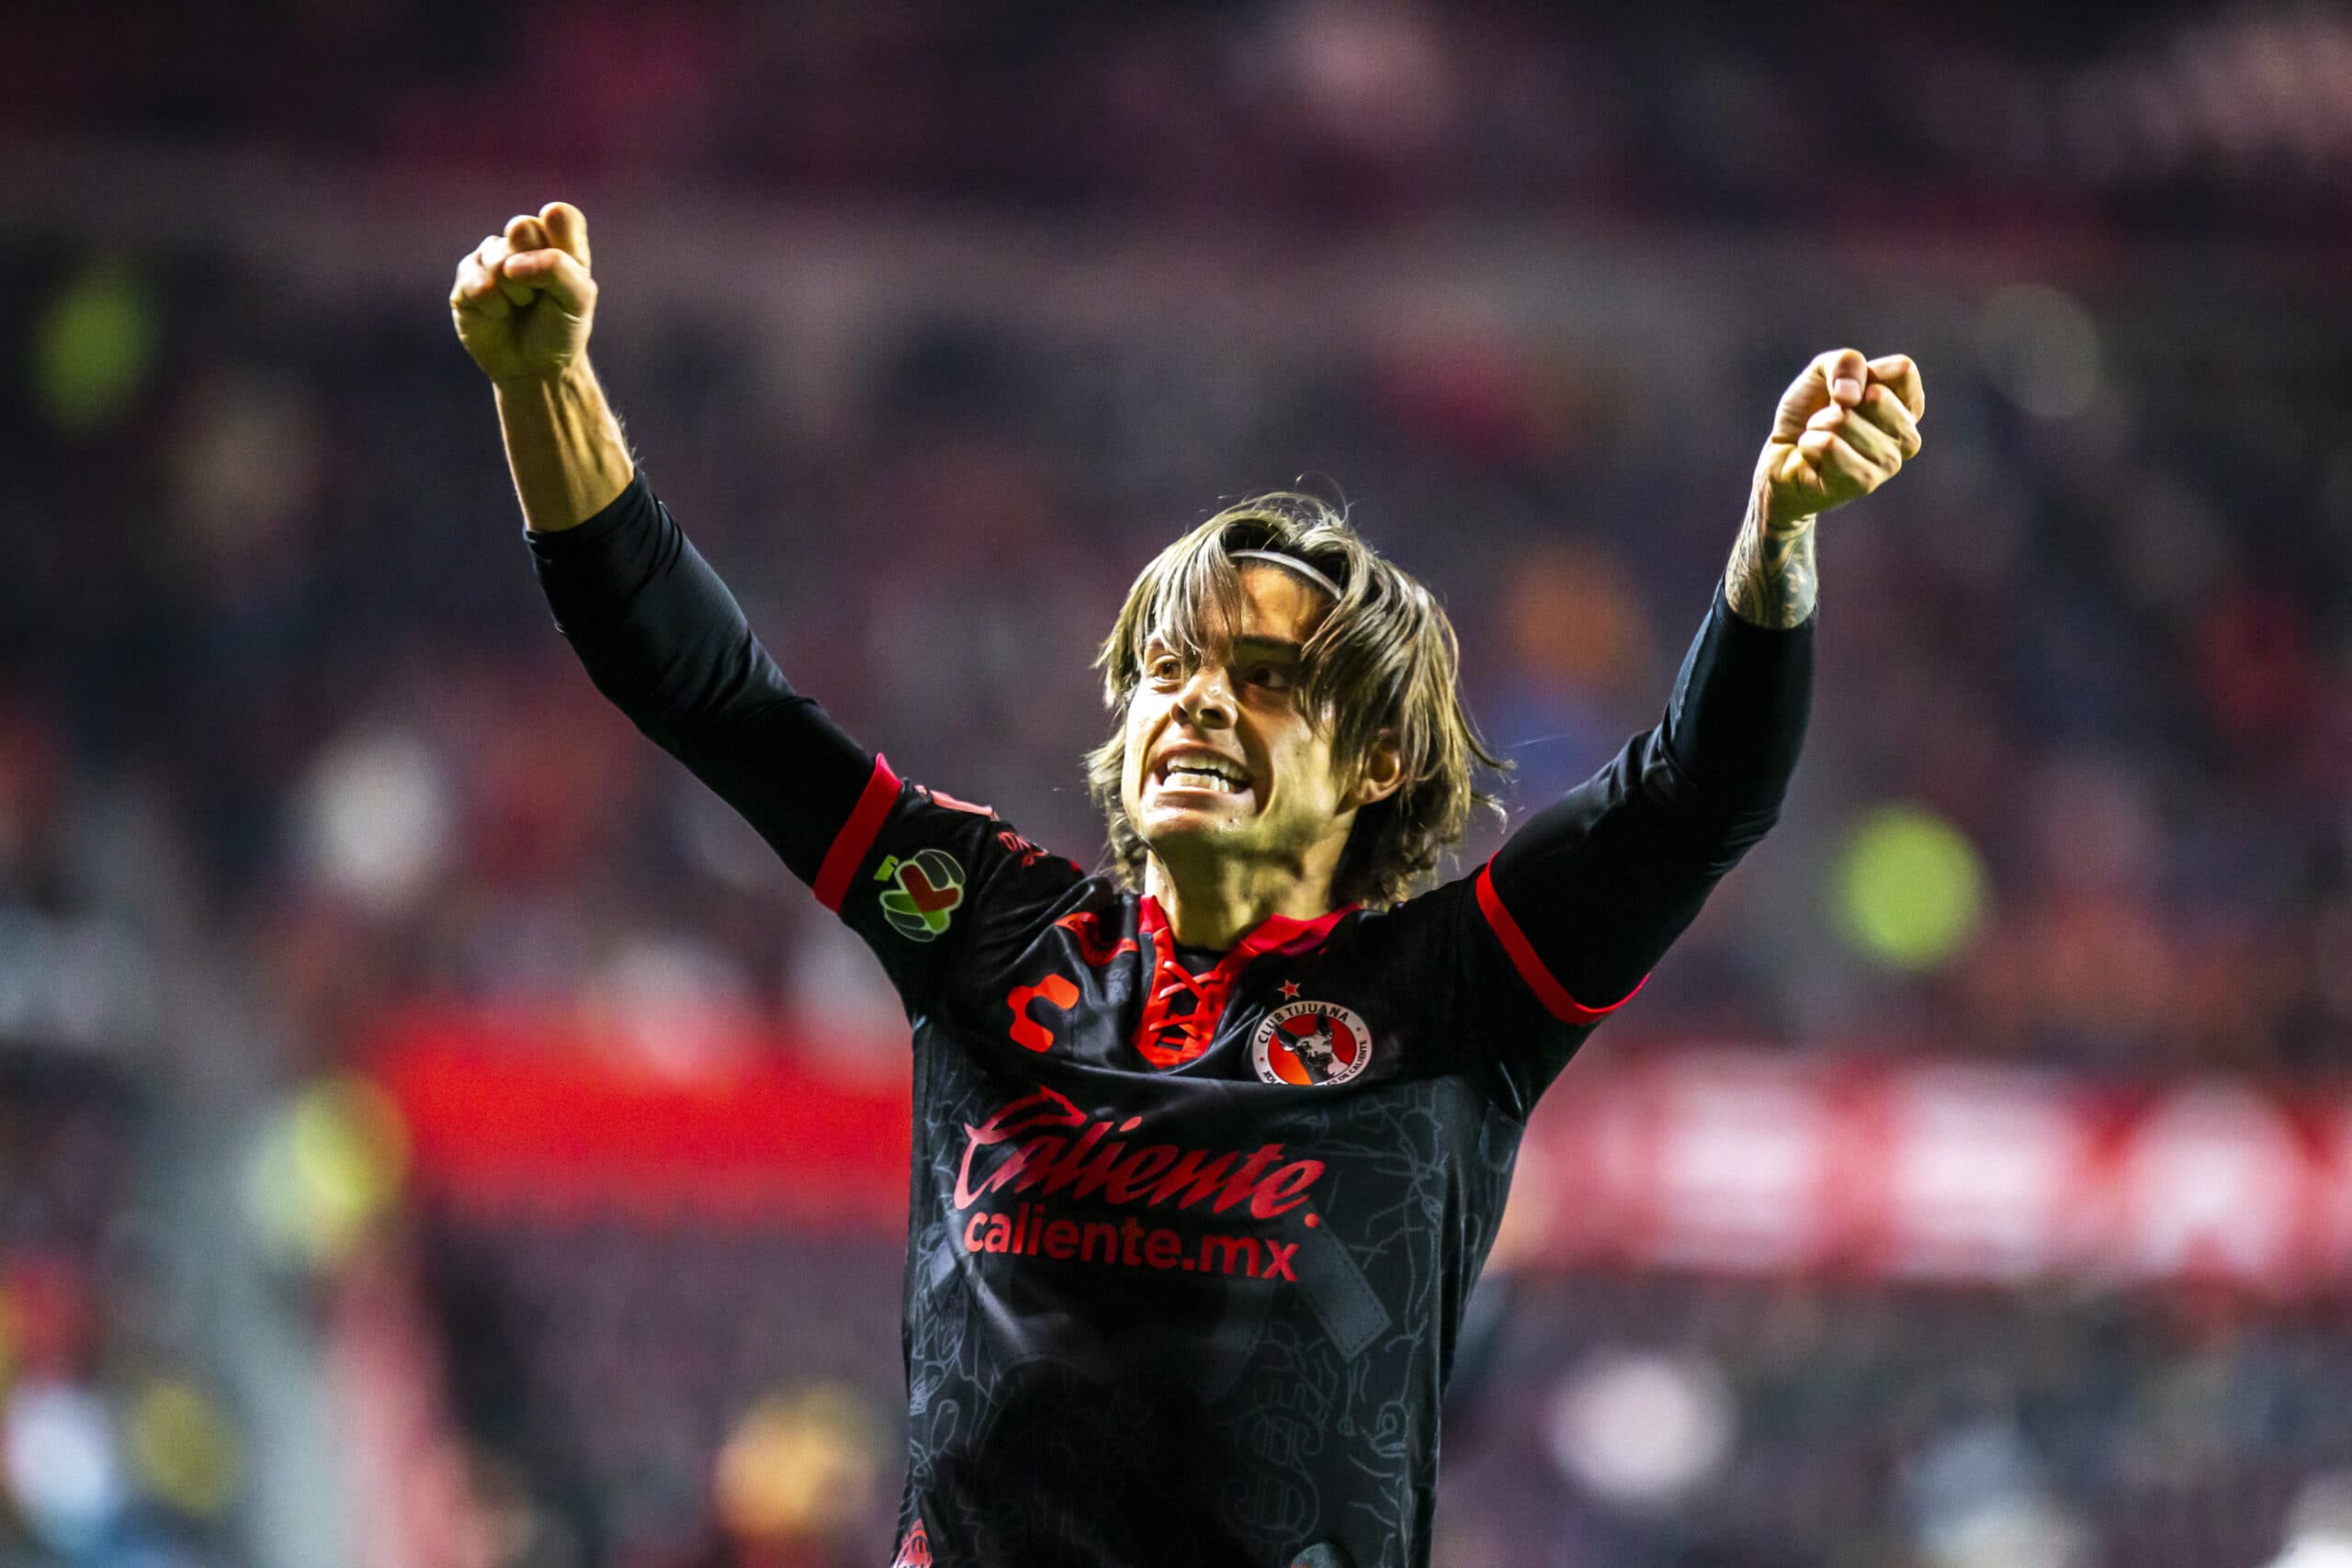 TIJUANA, MEXICO - FEBRUARY 05: Joaquin Montecinos of Tijuana celebrates his team's victory after the 4th round match between Club Tijuana and Pumas UNAM as part of the Torneo Grita Mexico C22 Liga MX at Caliente Stadium on February 5, 2022 in Tijuana, Mexico. (Photo by Francisco Vega/Getty Images)